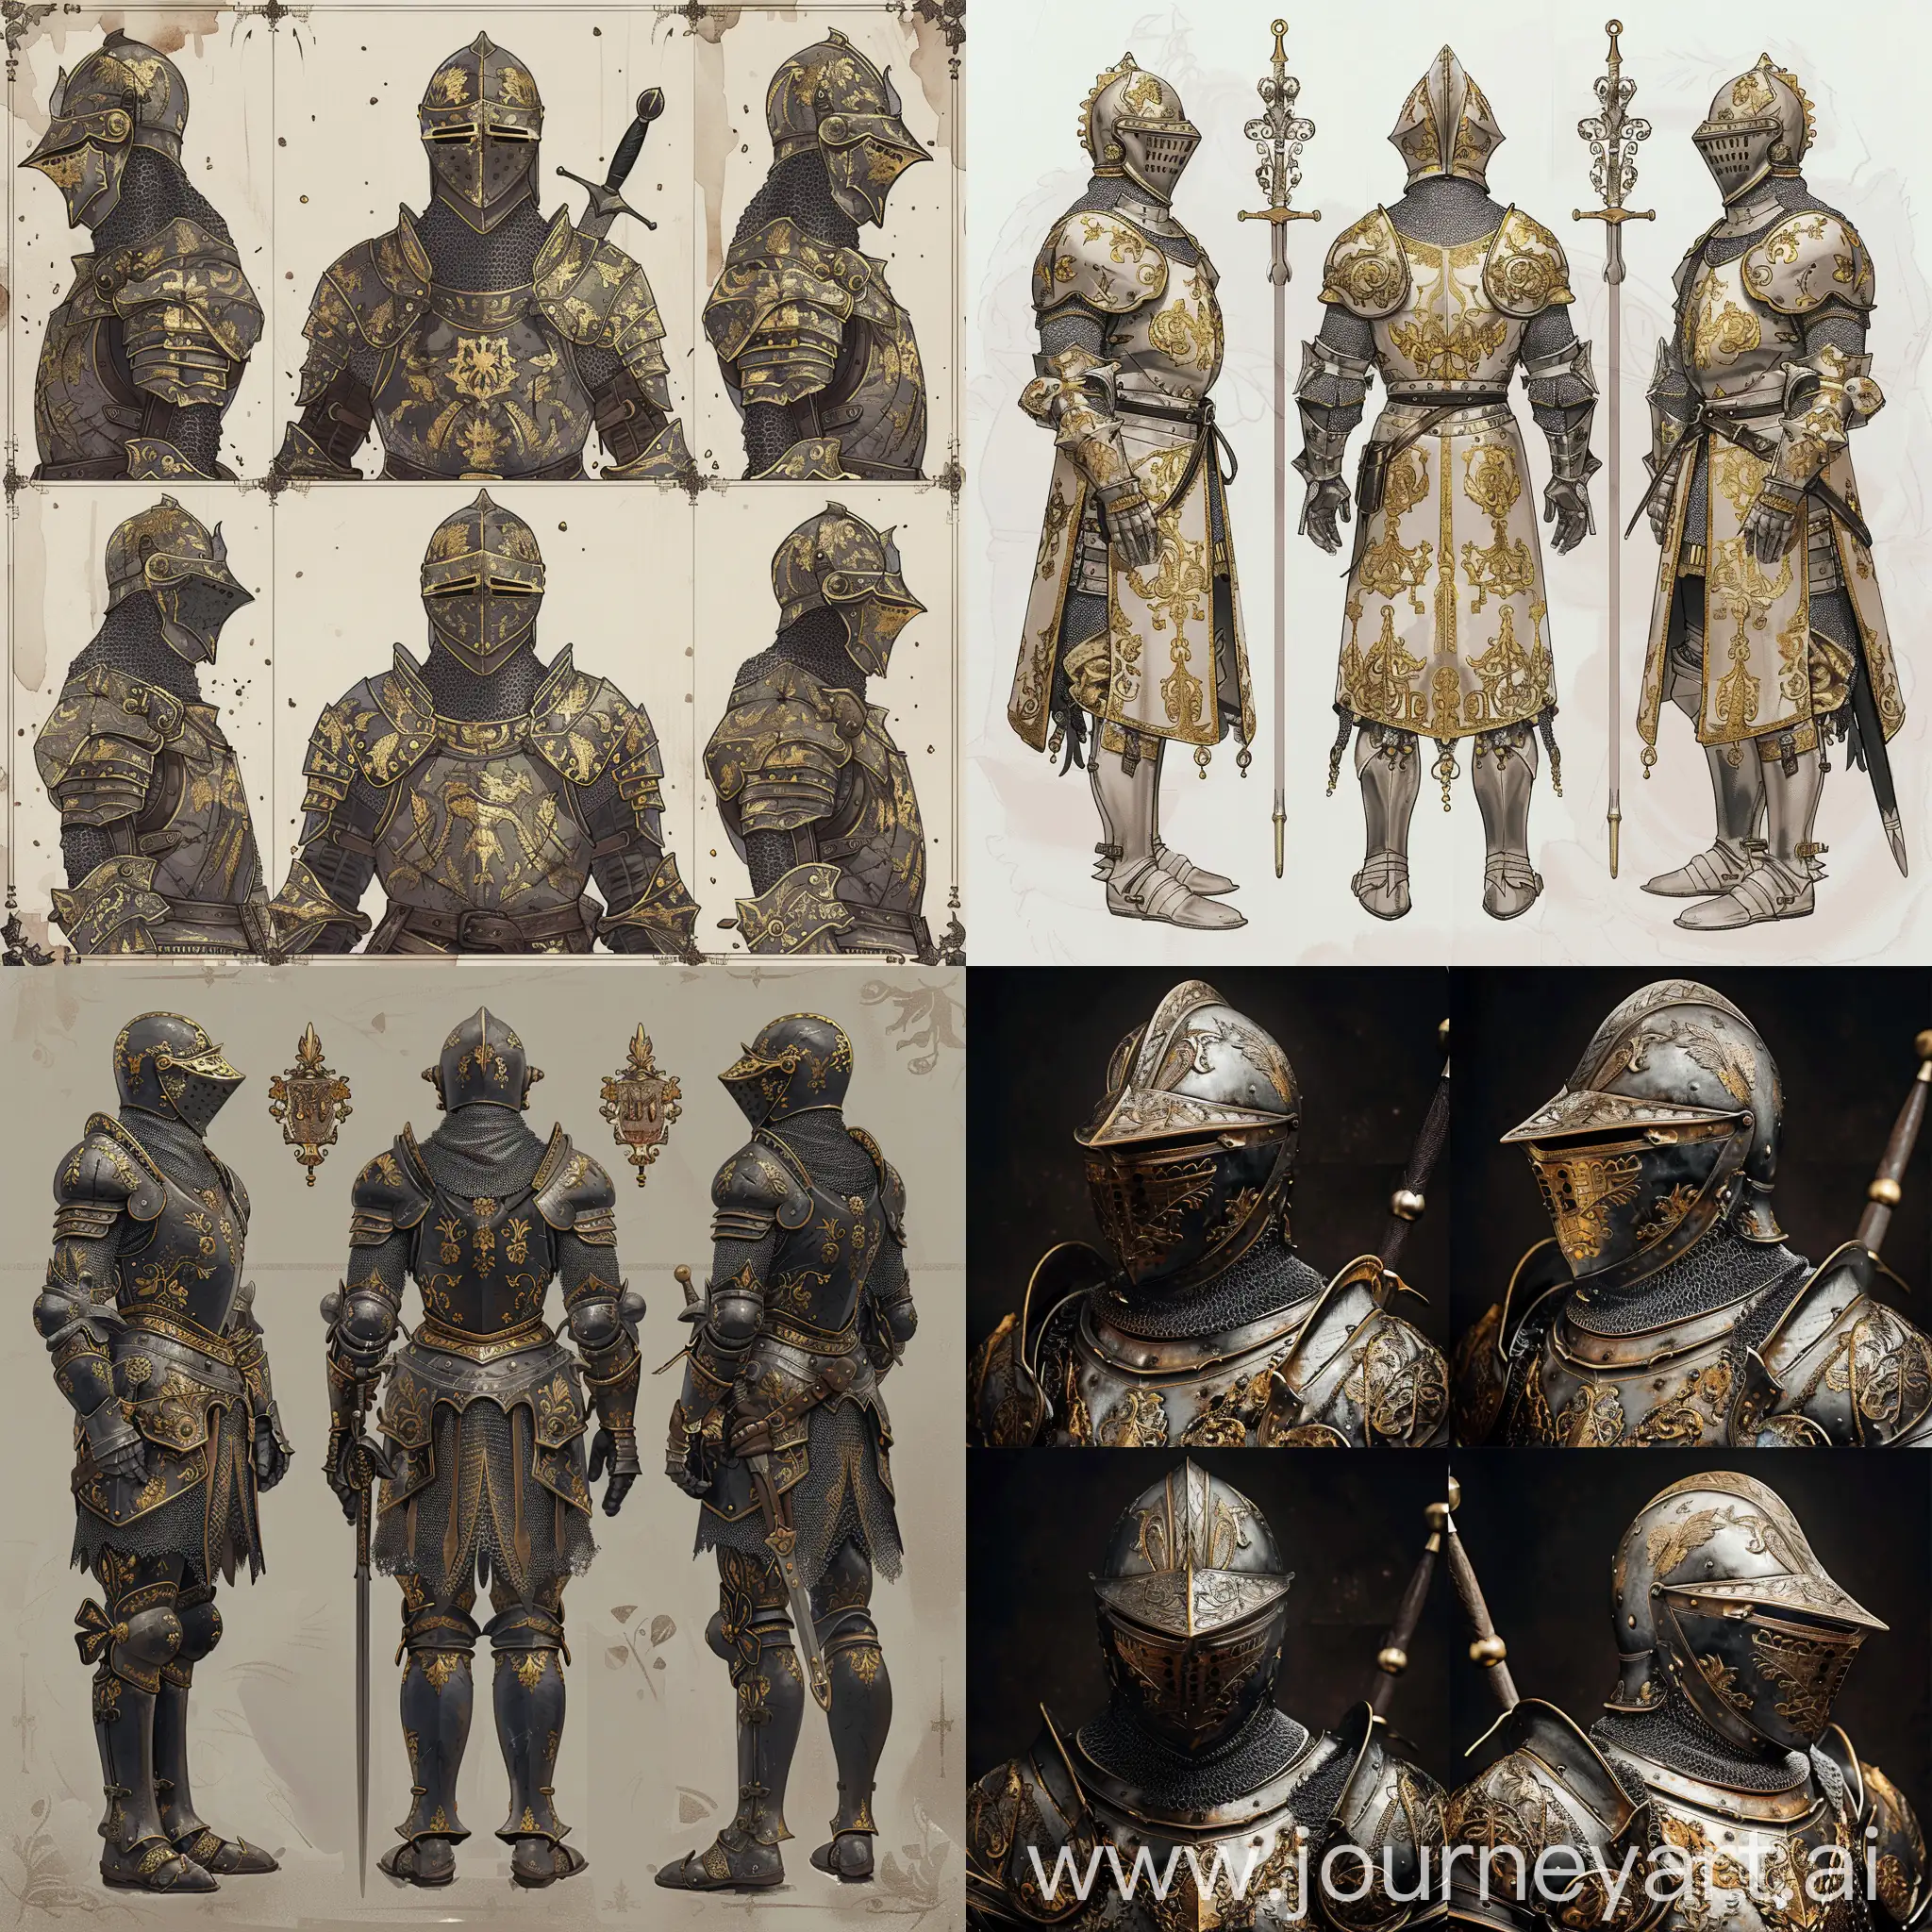 French-Mercenary-Knight-in-Magnificent-Lamellar-Armor-with-Gold-Accents